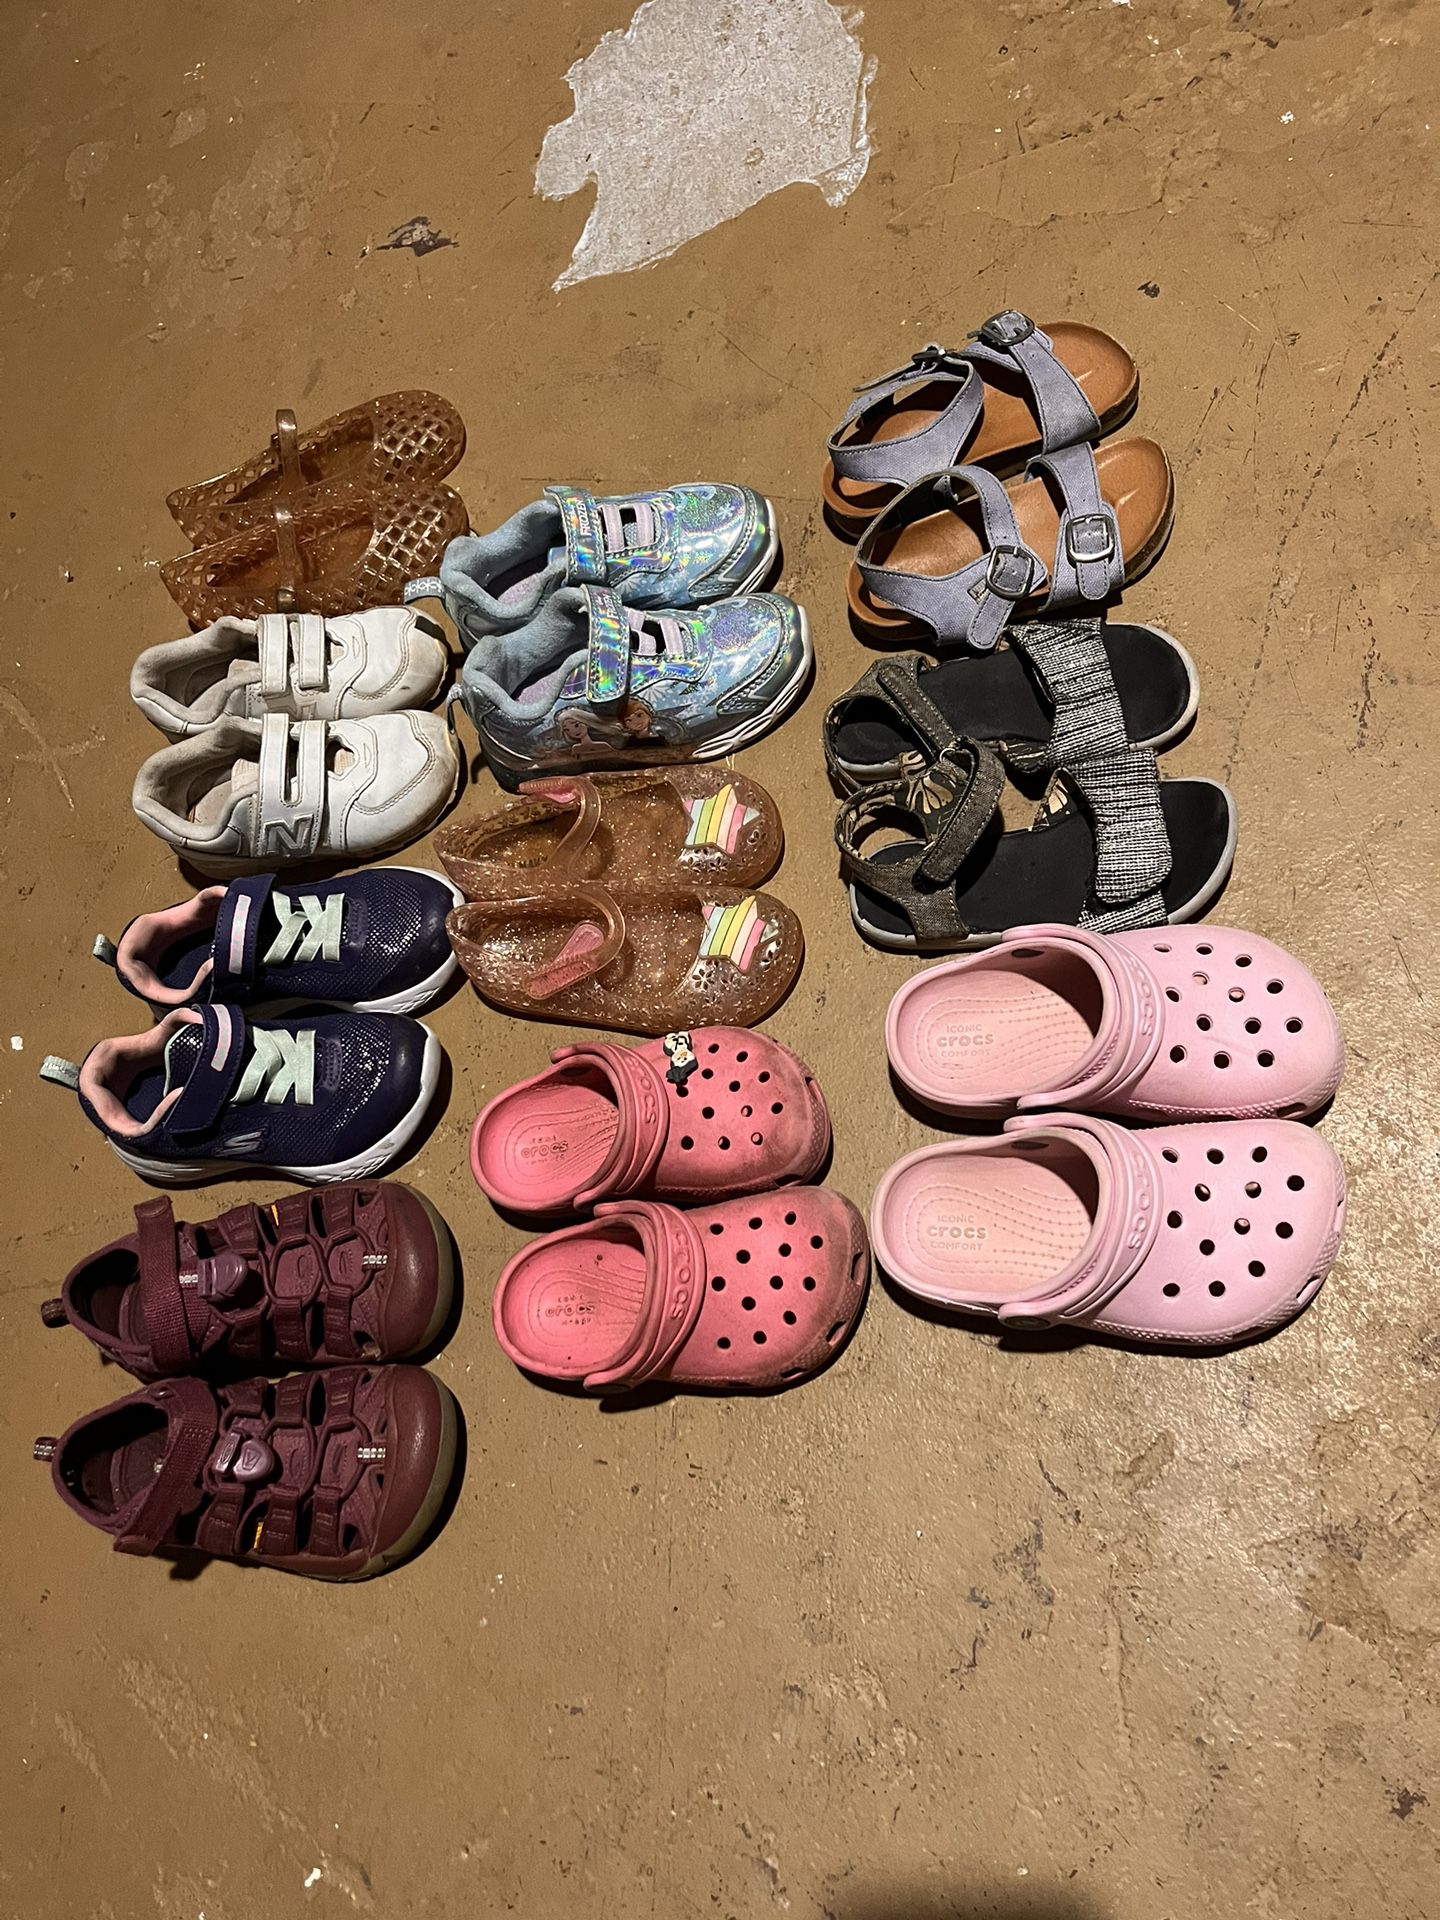 Toddler girl Shoes 